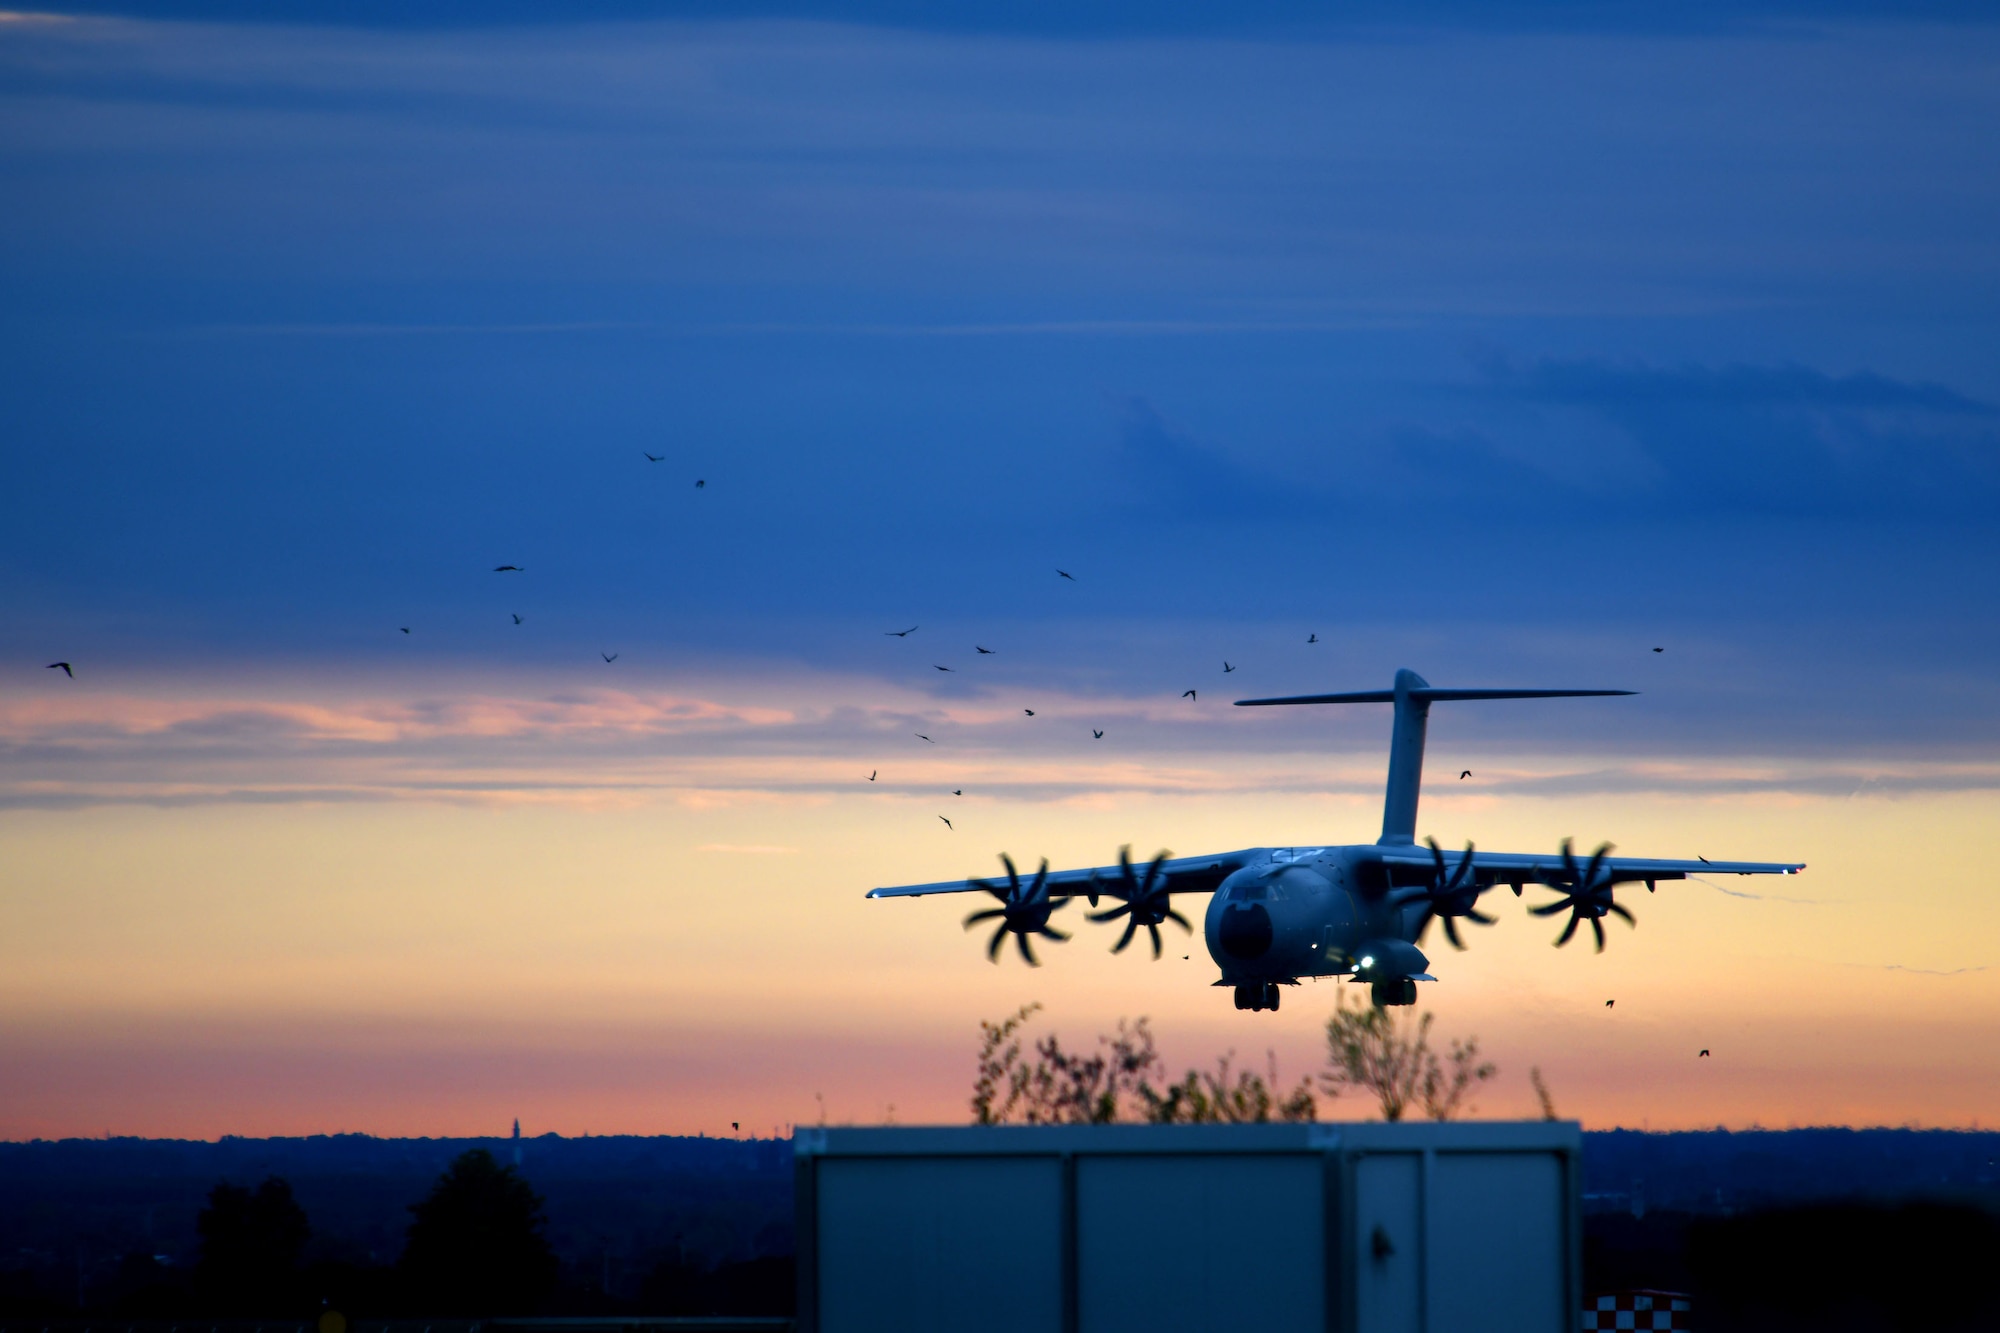 A Spanish air force Airbus A400M approaches for landing at Aviano Air Base, Italy, Sept. 28, 2020. U.S. Airmen assigned to the 31st Aircraft Maintenance Squadron and 510th Fighter Squadron returned from a flying training deployment to Royal Air Force Lakenheath, United Kingdom. (U.S. Air Force photo by Staff Sgt. K. Tucker Owen)